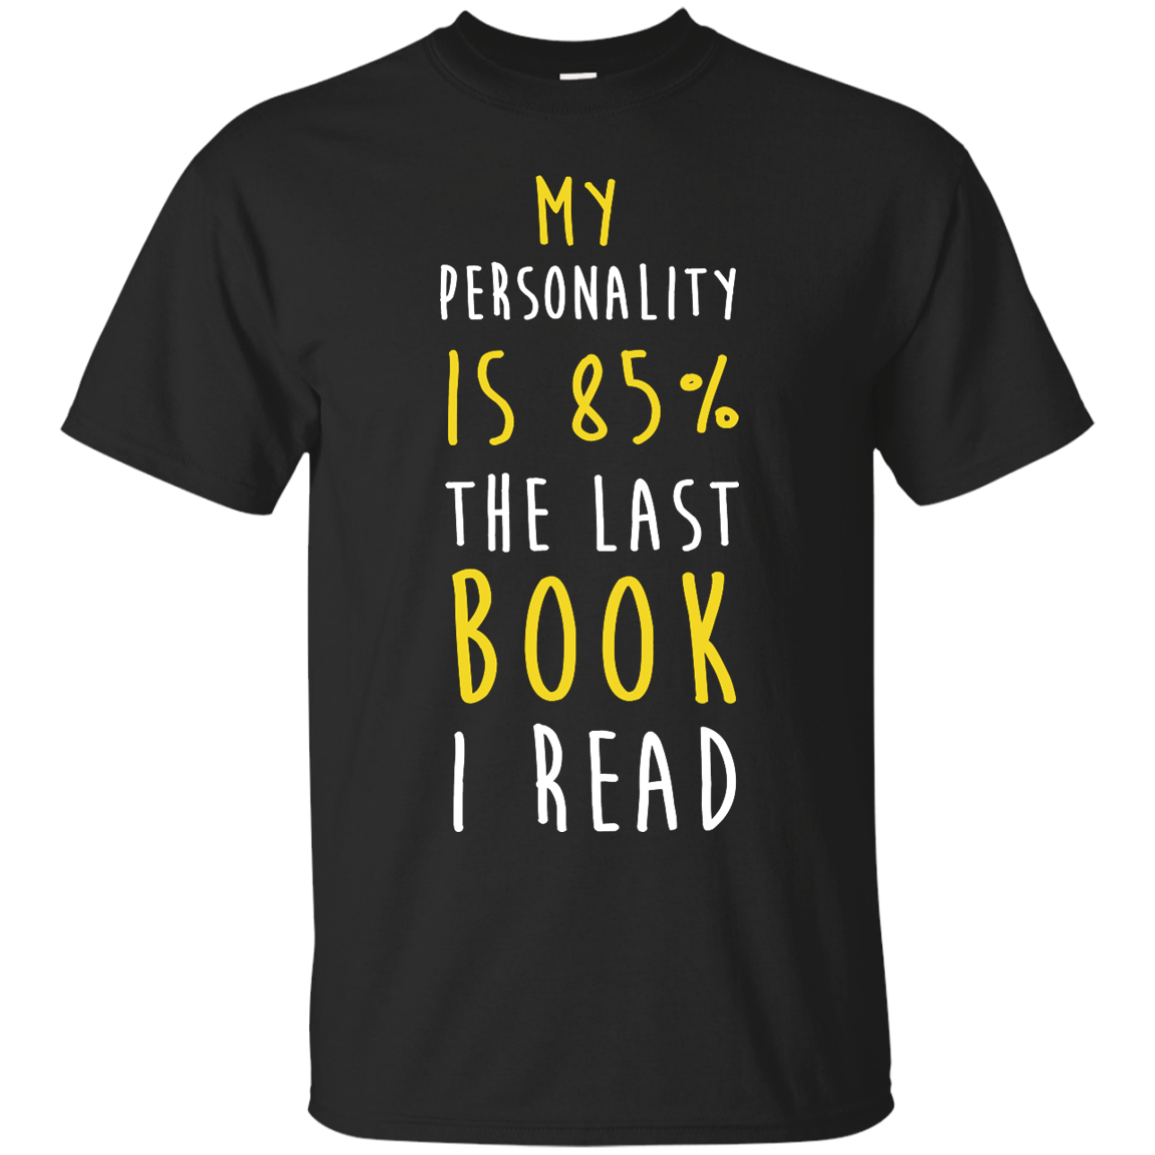 My Personality Is 85% The Last Book I Read Shirt